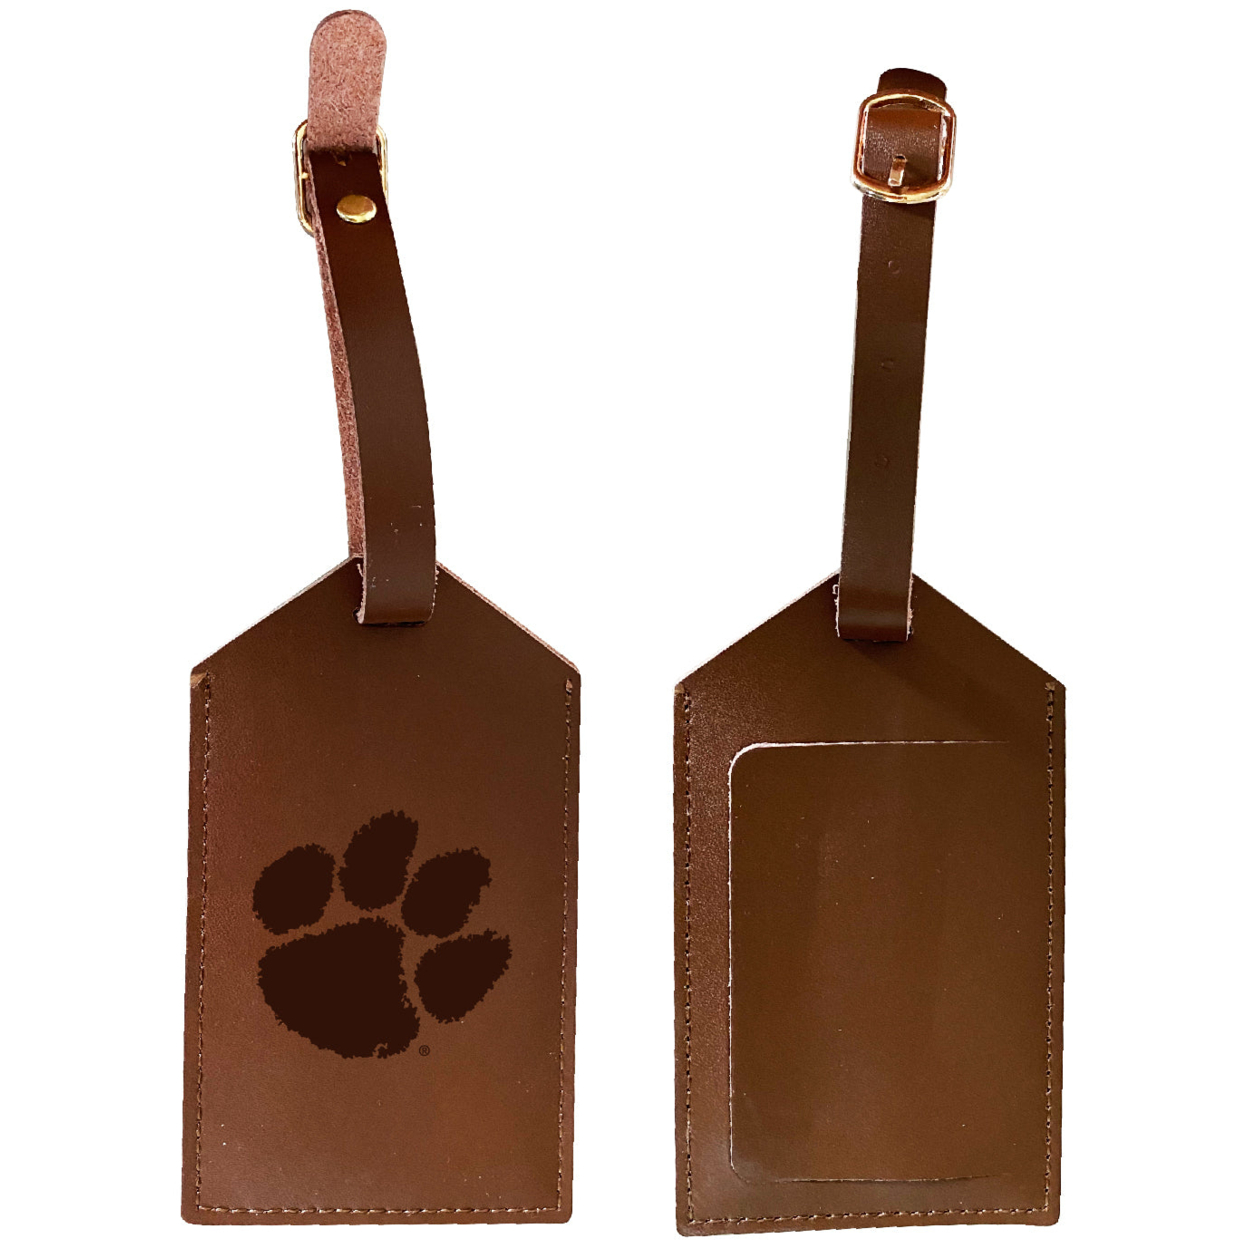 Clemson Tigers Leather Luggage Tag Engraved